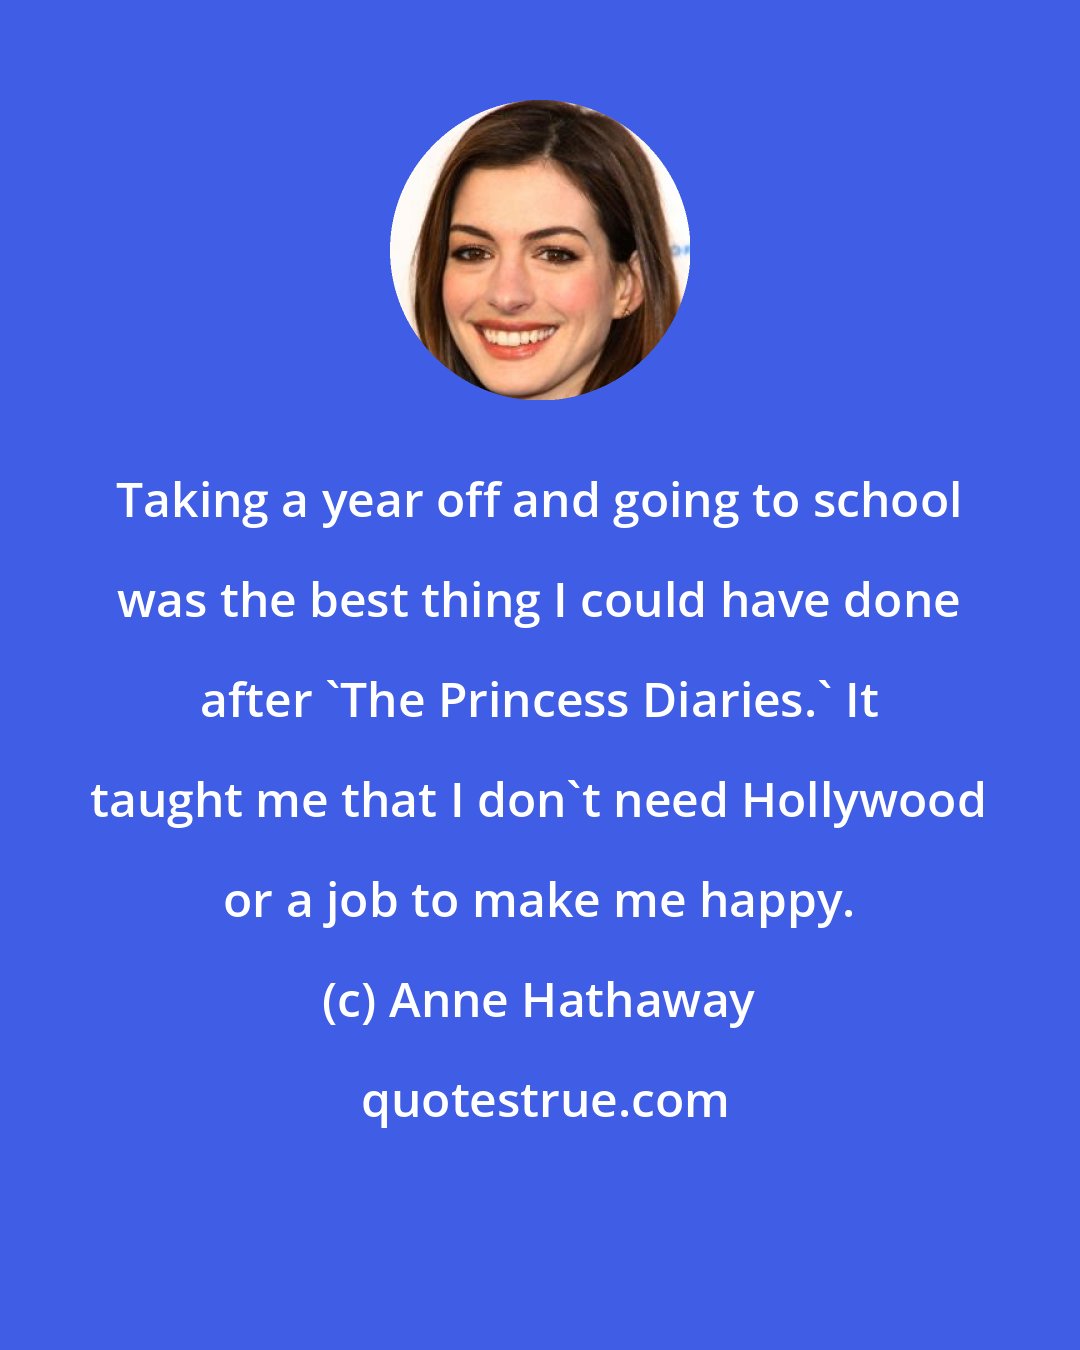 Anne Hathaway: Taking a year off and going to school was the best thing I could have done after 'The Princess Diaries.' It taught me that I don't need Hollywood or a job to make me happy.